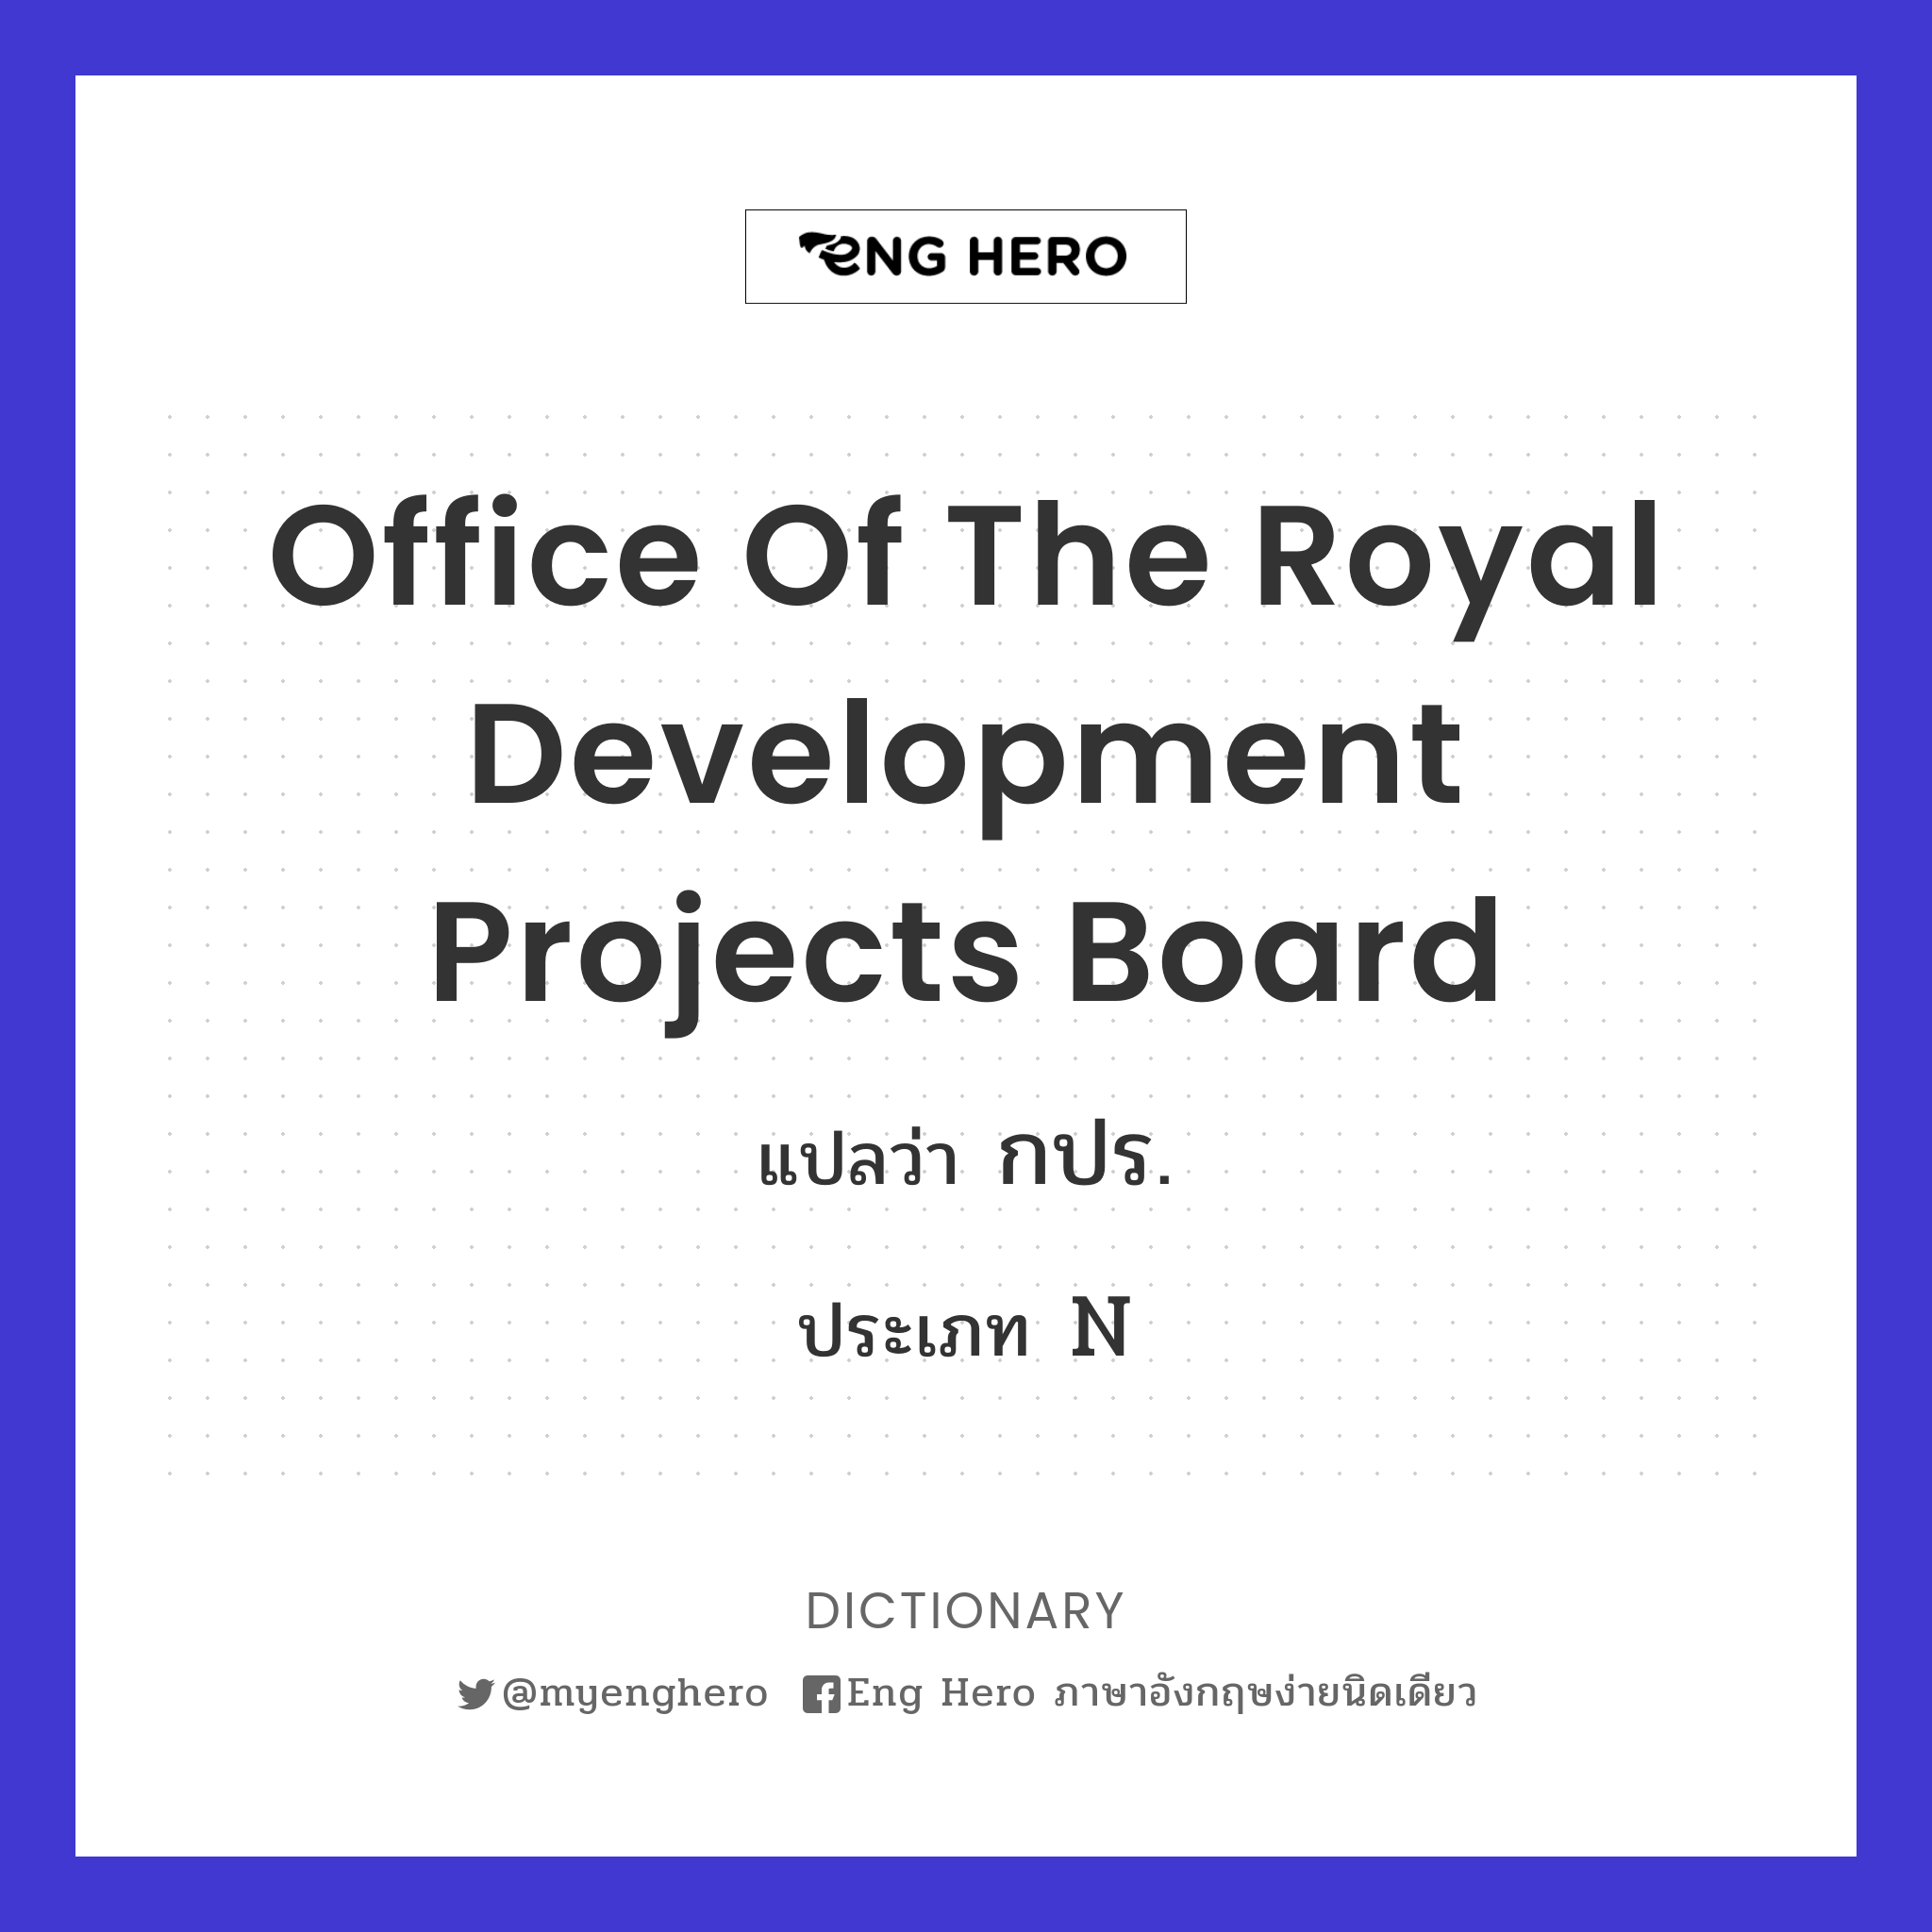 Office of the Royal Development Projects Board